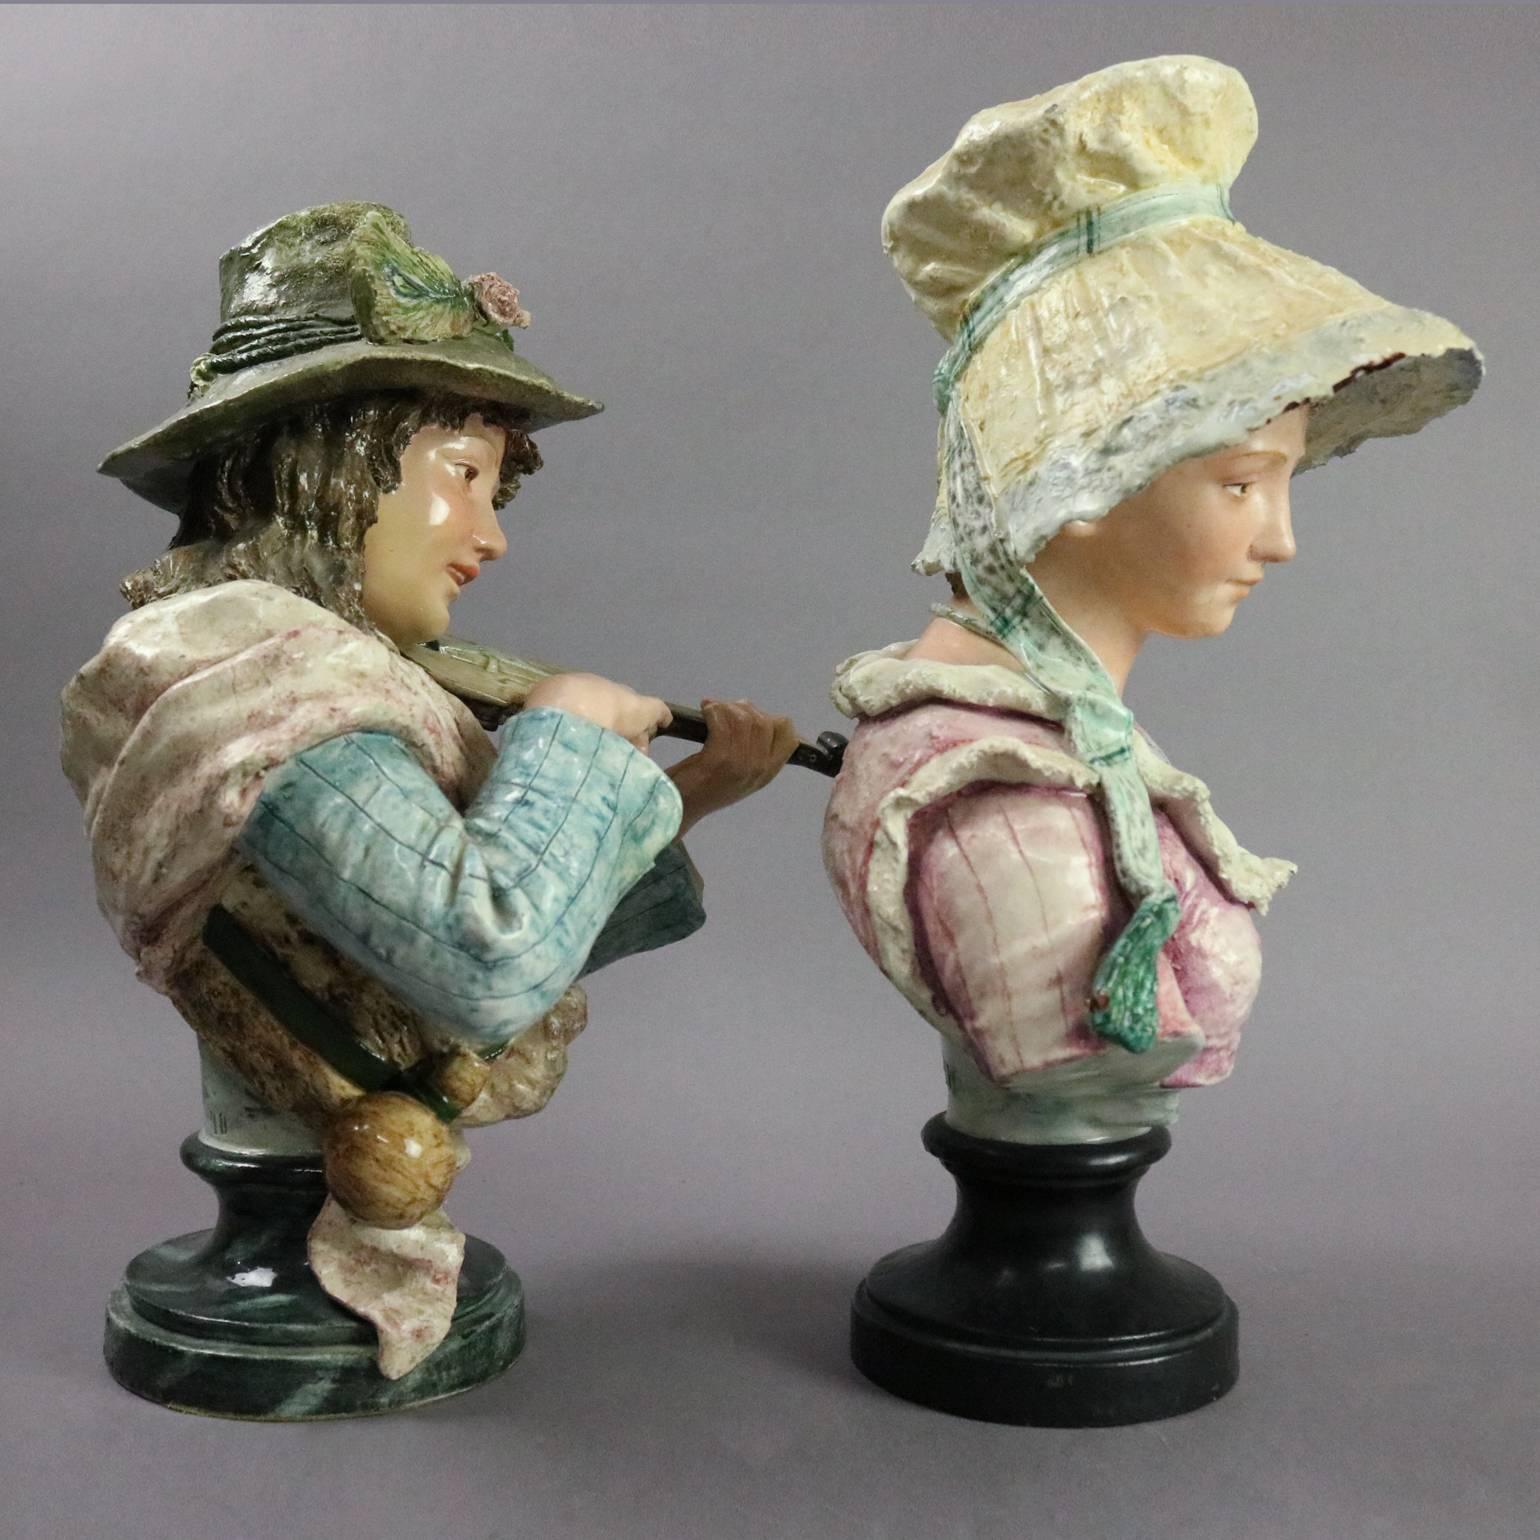 Hand-Painted Pair of Antique German Majolica Pottery Busts, Young Woman and Musician